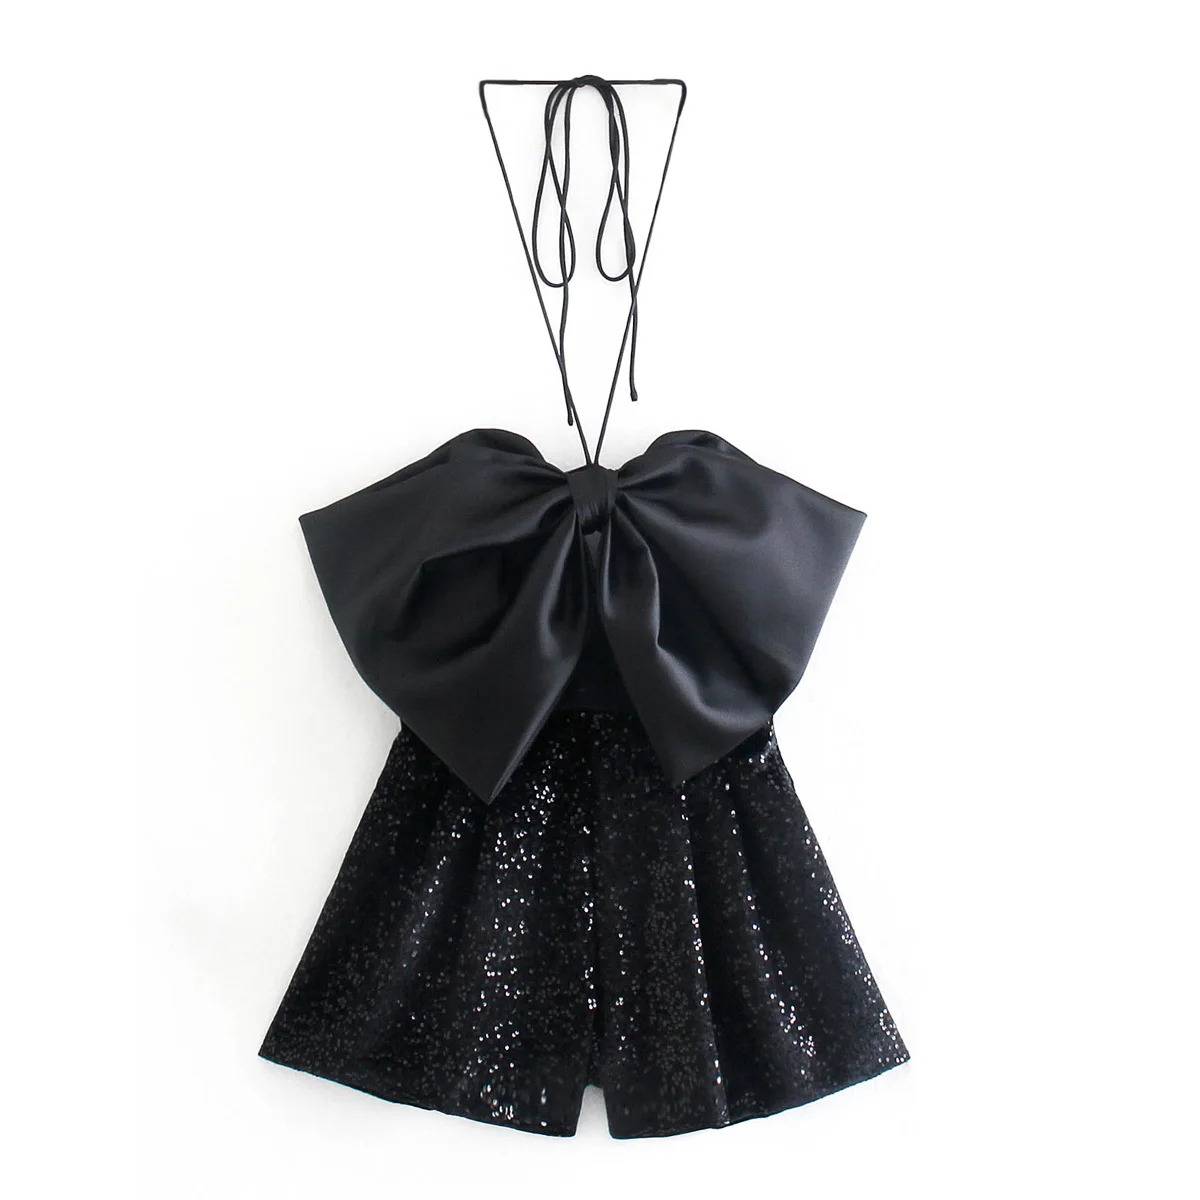 2022 Woman Fashion Black Sequin Halter Playsuit with Big Bow Chic Lady Prom Party Stunning High Waist Short Jumpsuit Women